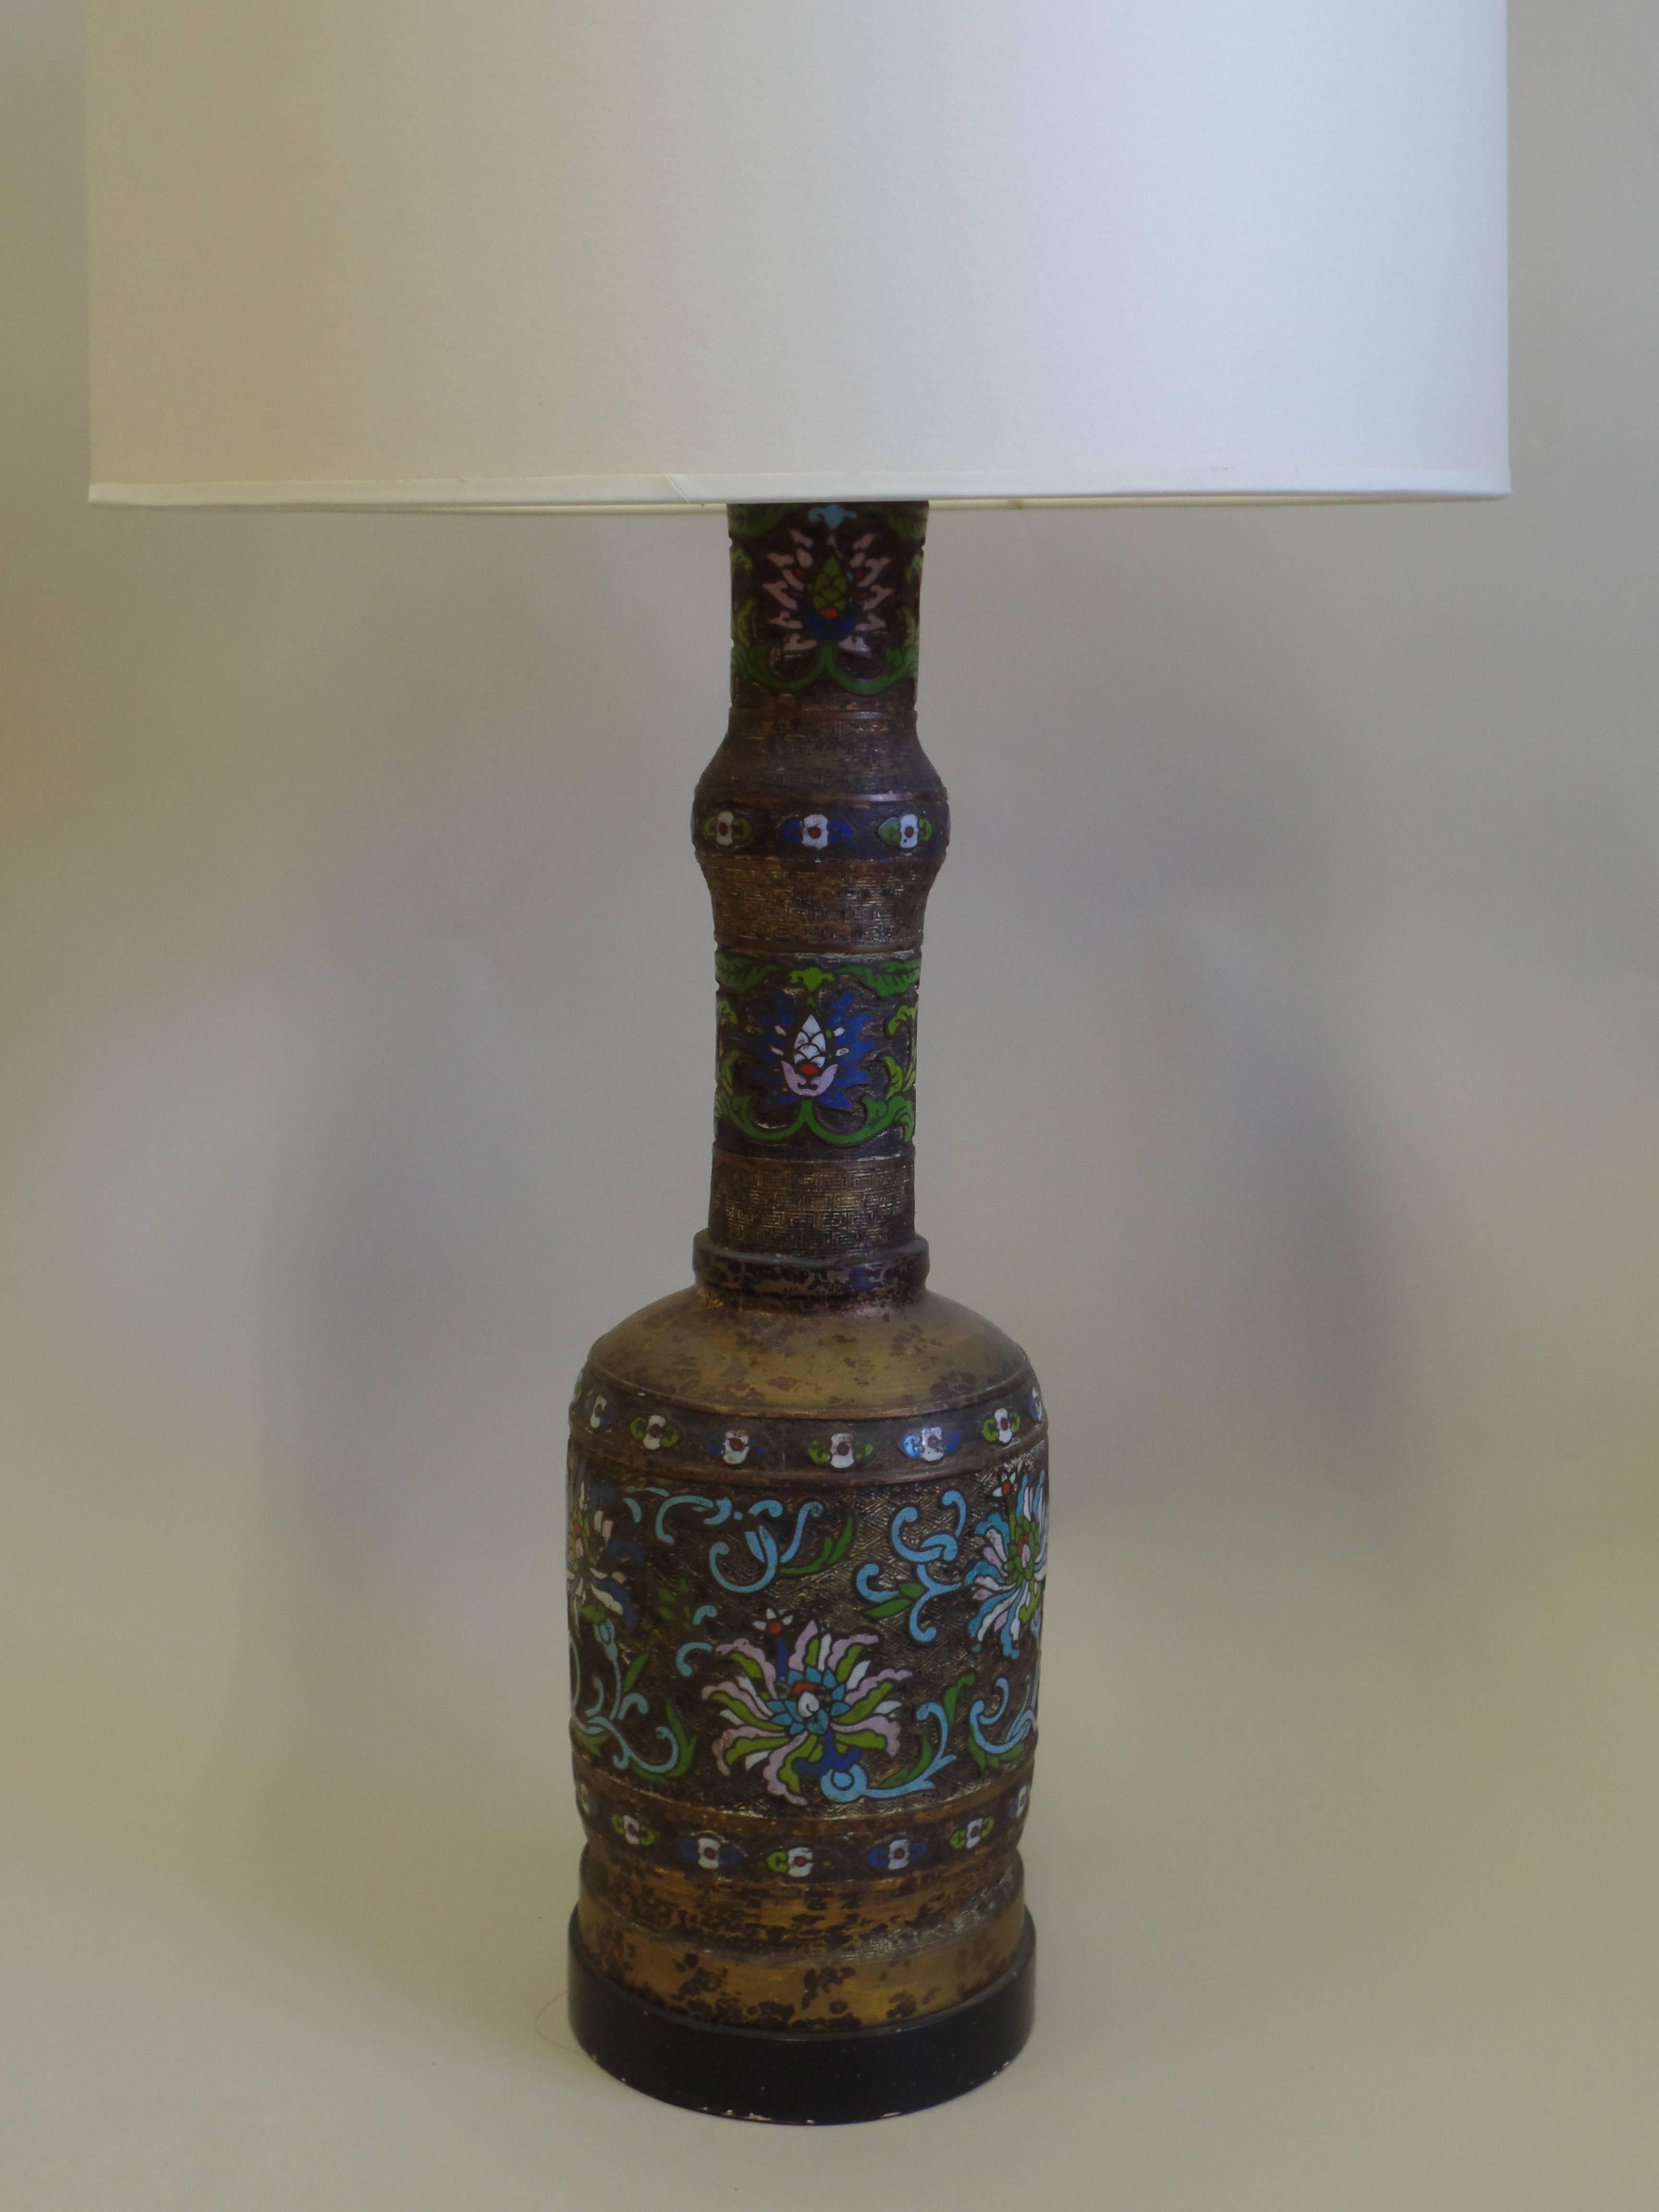 A large pair of gilt bronze and hand-painted and enameled Champleve lamps.
An elegant modern neoclassical urn form is combined with a mottled gilt bronze surface and with enamel inlaid (Cloisonne) multicolored florals around the body and neck